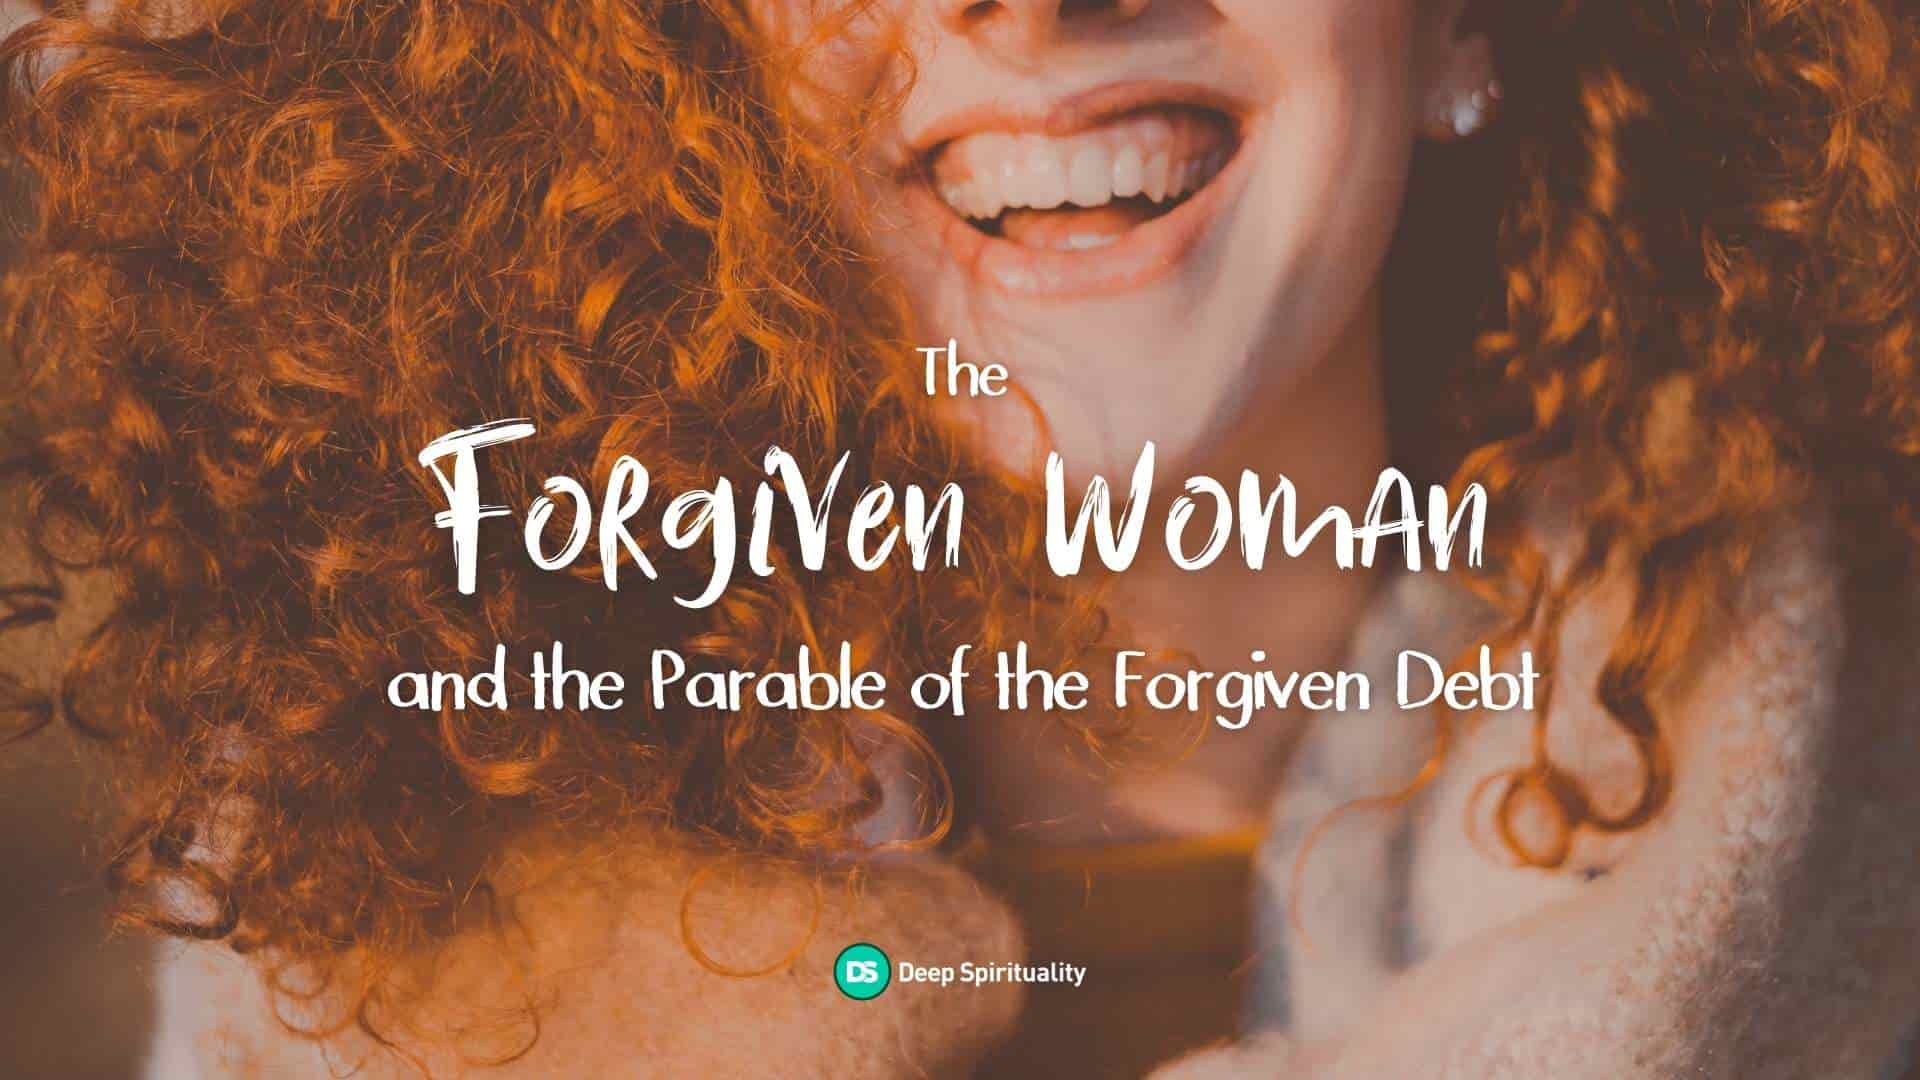 The Forgiven Woman and the Parable of the Forgiven Debt: How God’s Love Becomes Personal 131